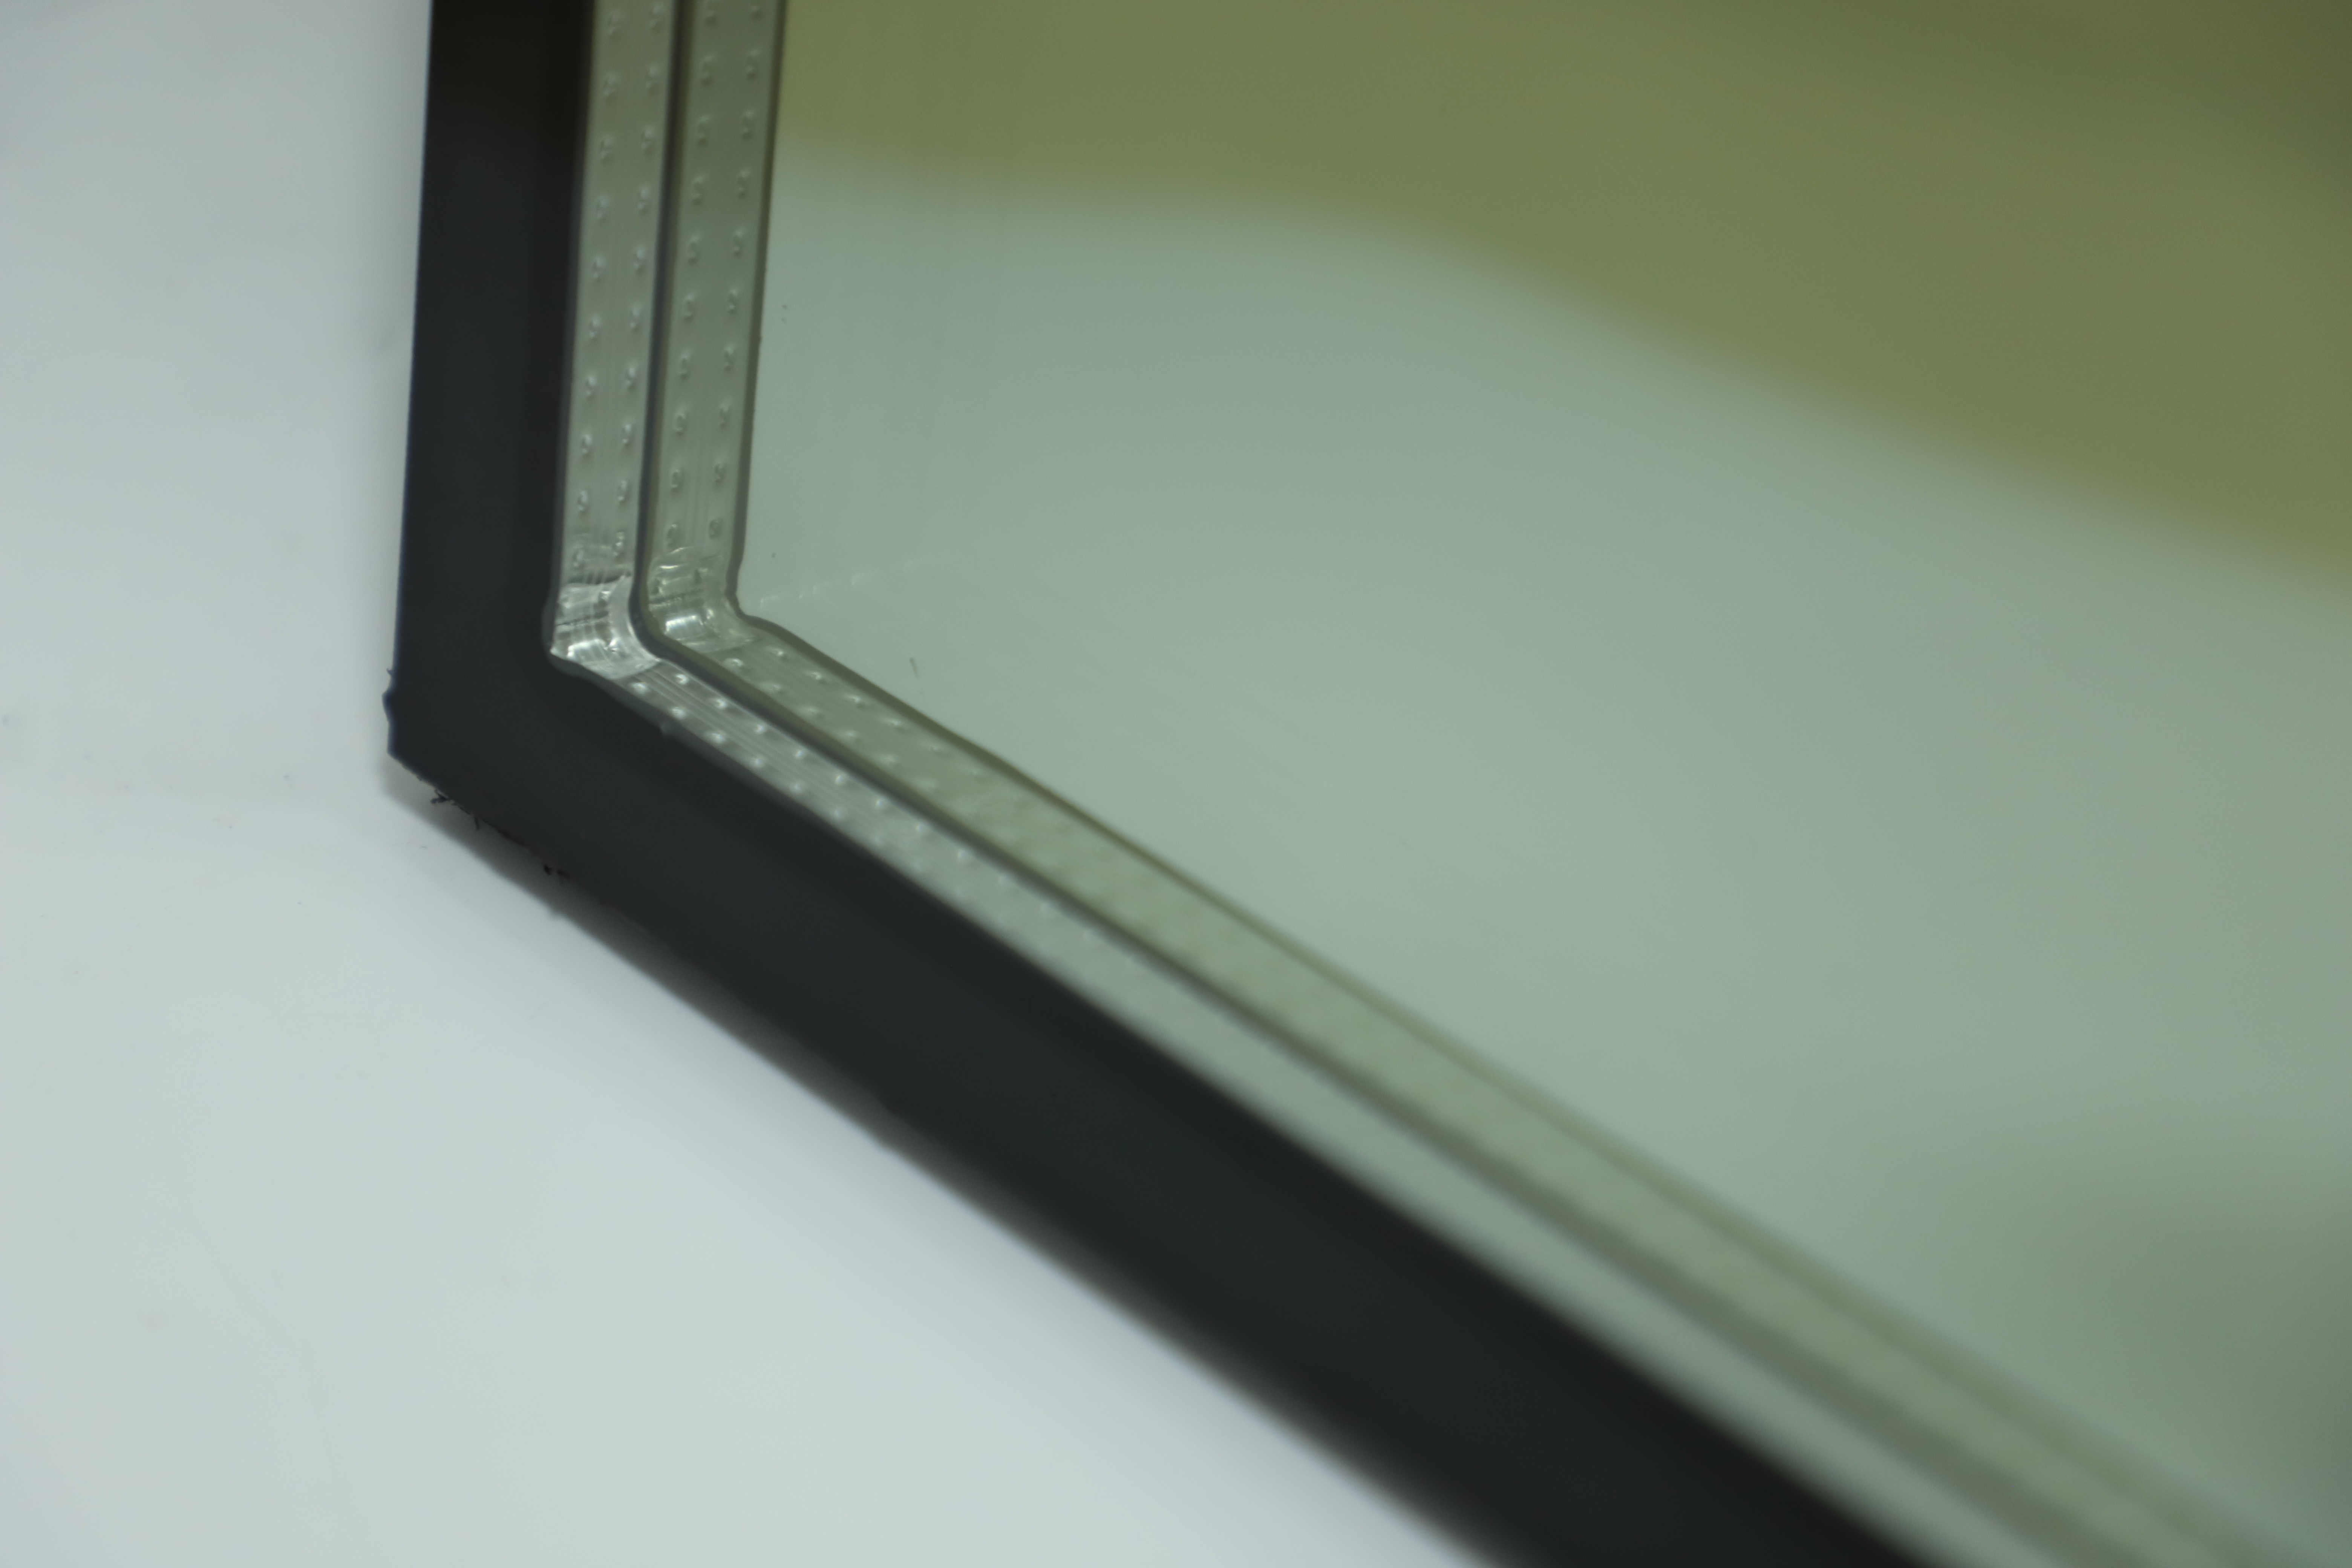 Insulated Glass Panels